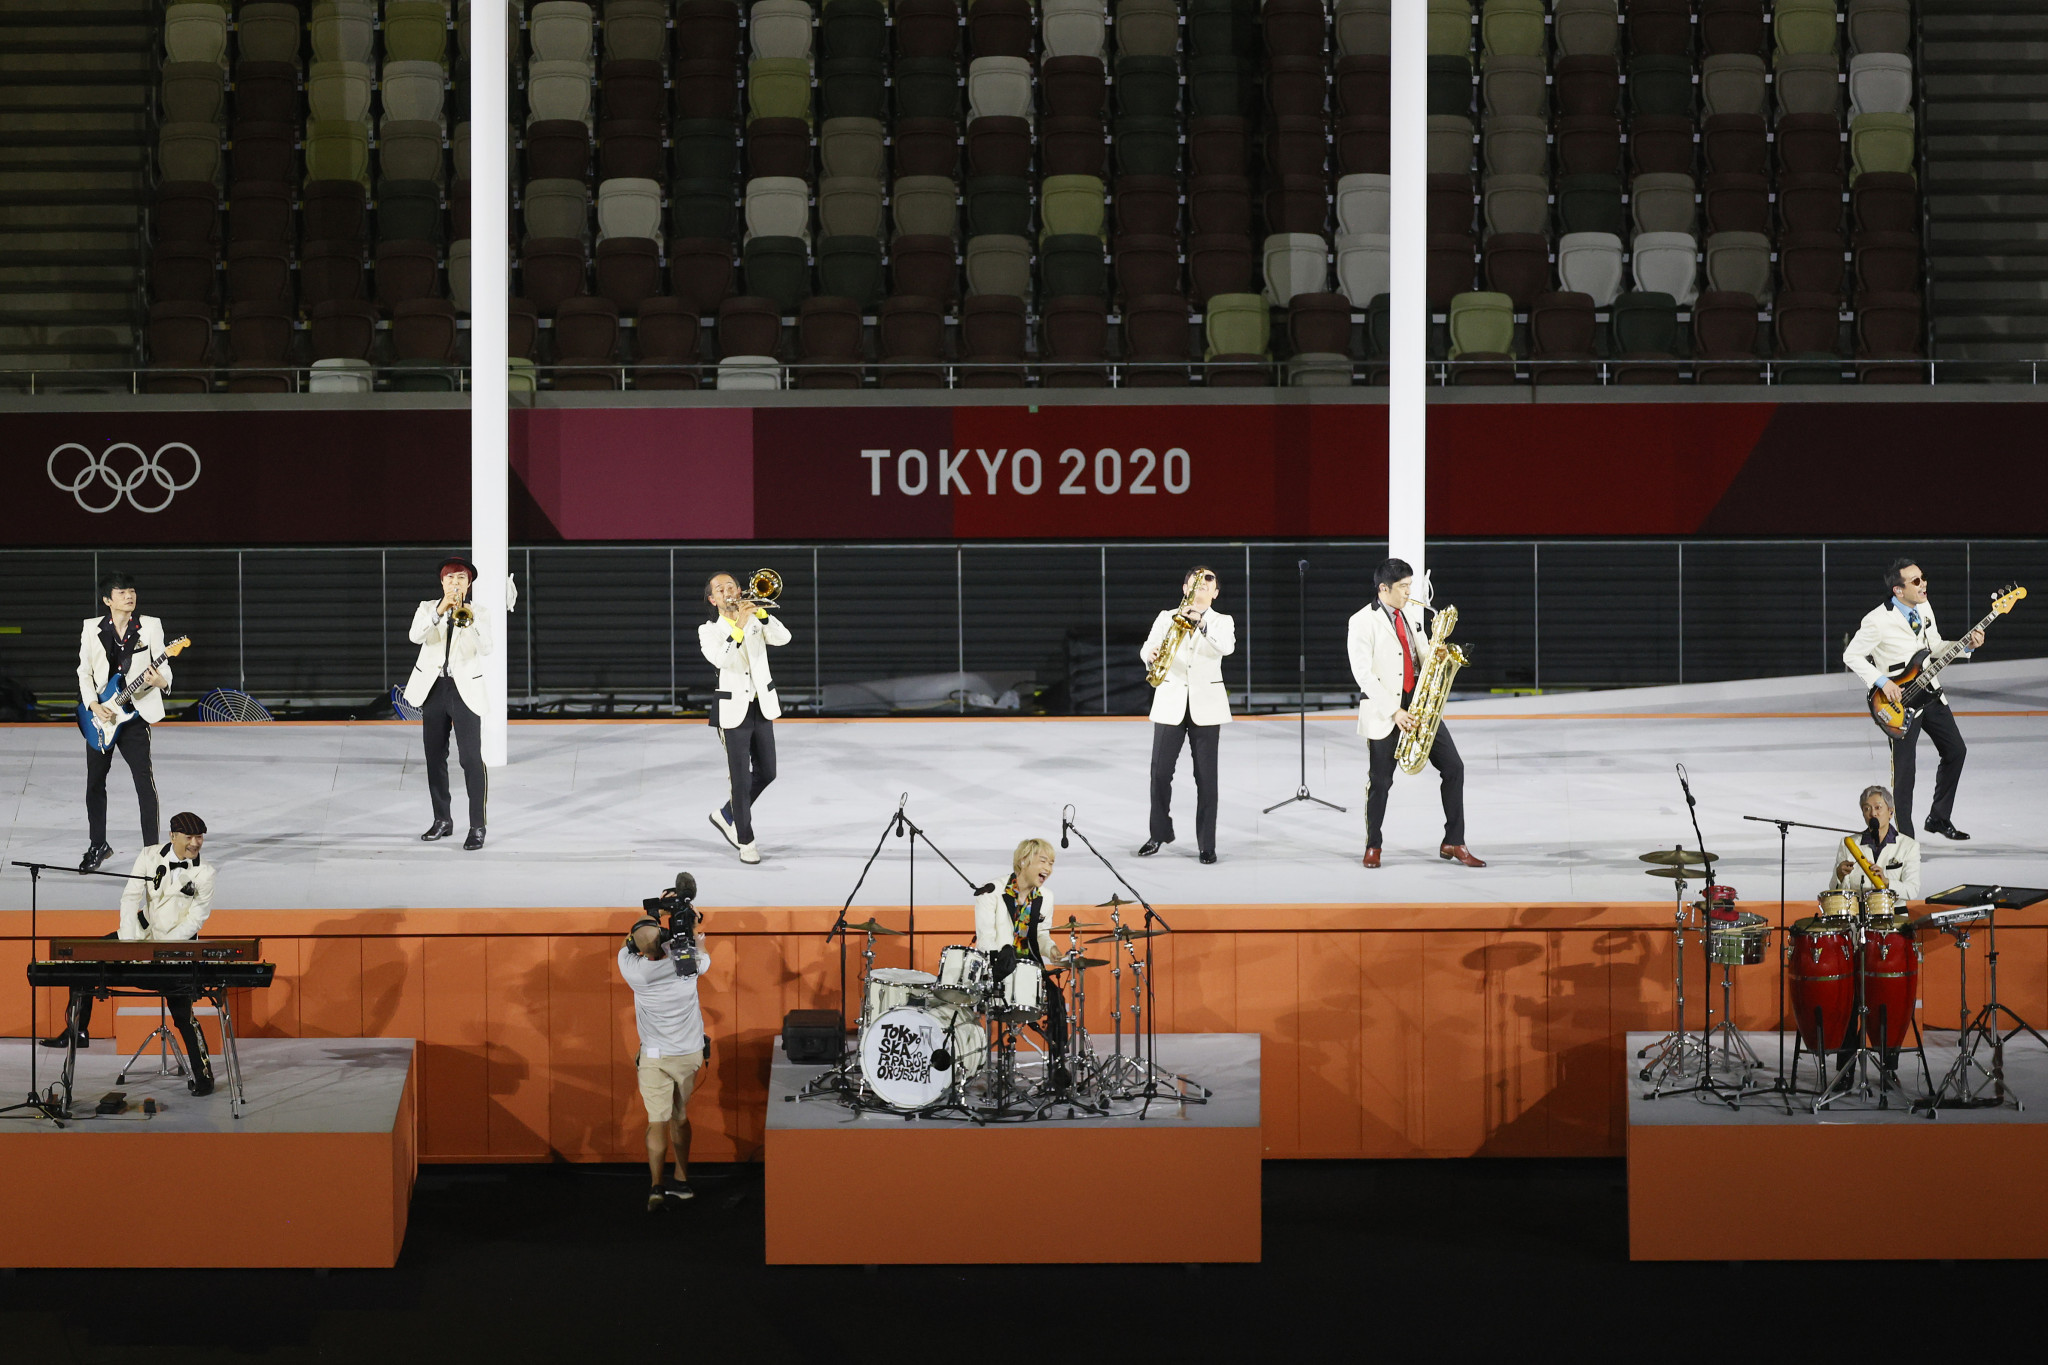 The Tokyo Ska Paradise Orchestra provided musical entertainment during the Closing Ceremony ©Getty Images